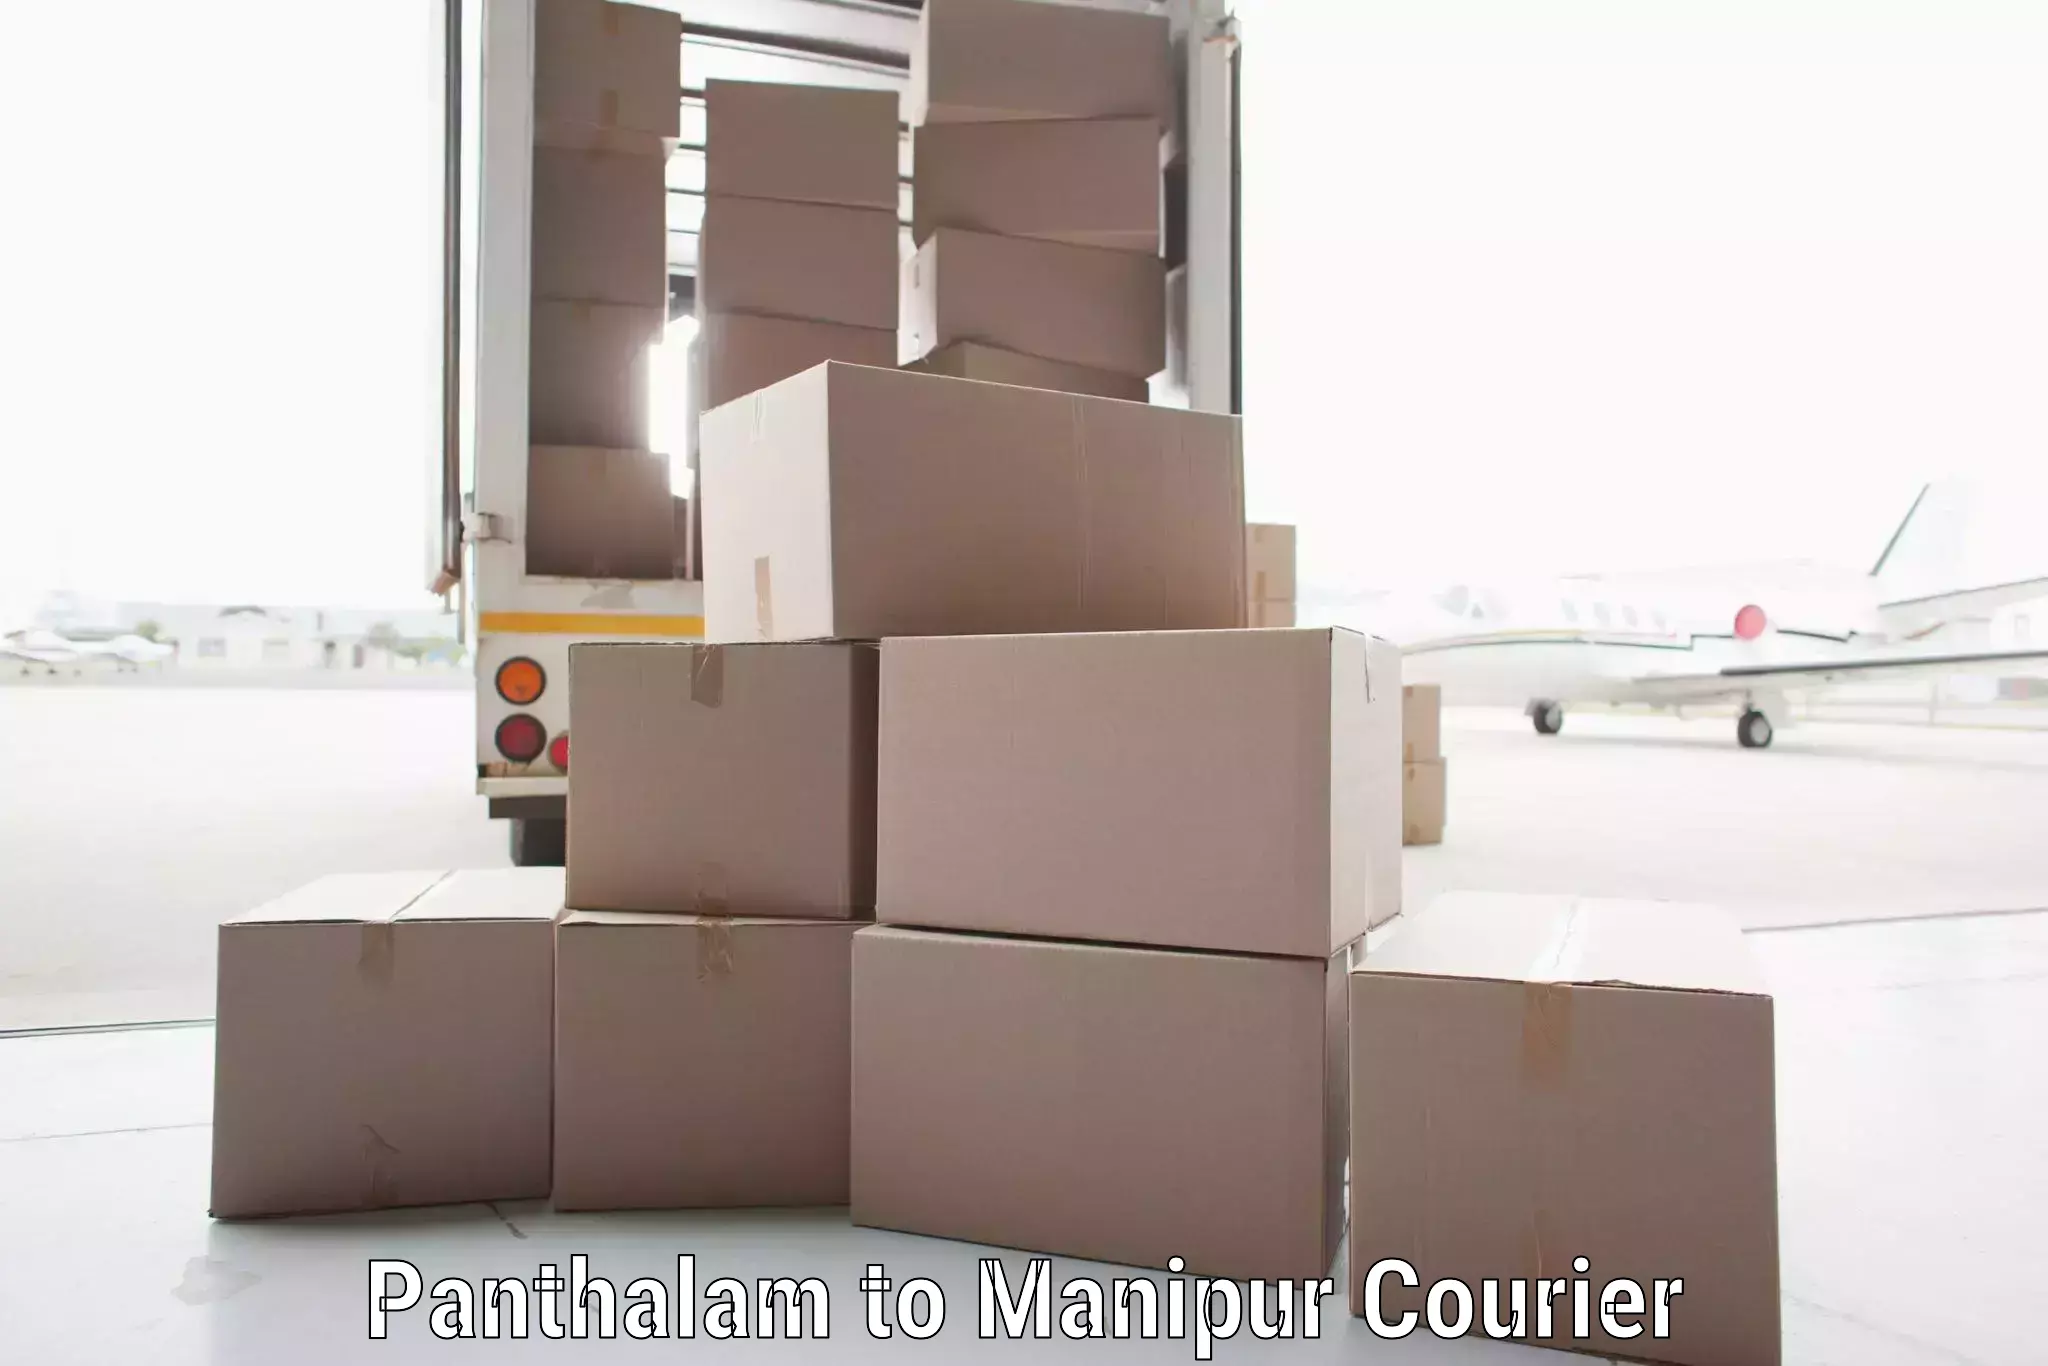 International courier networks Panthalam to Thoubal